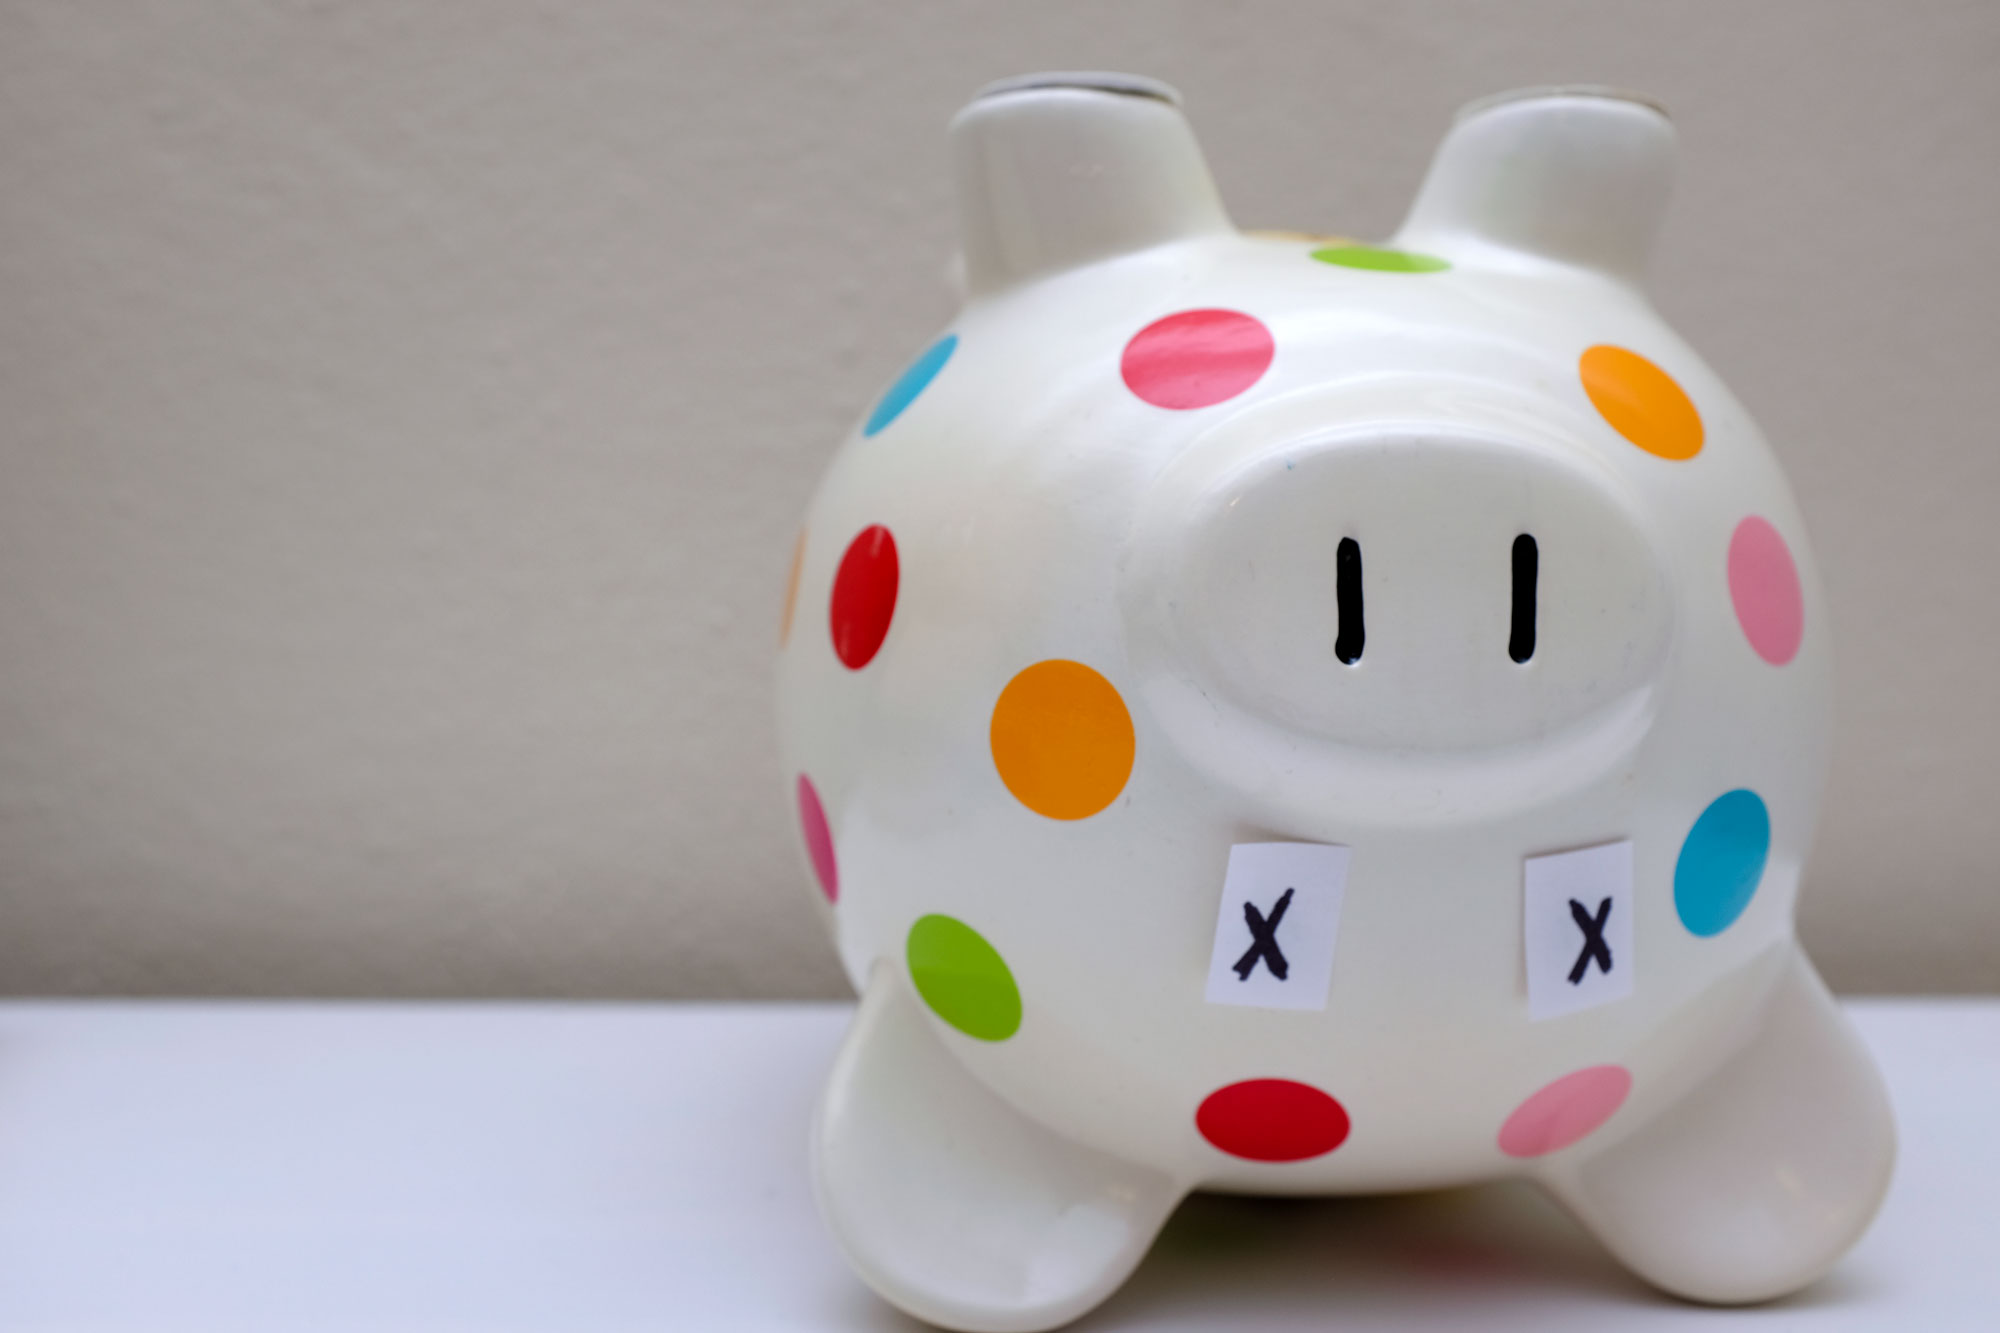 Upside-down piggy bank with "x" over its eyes